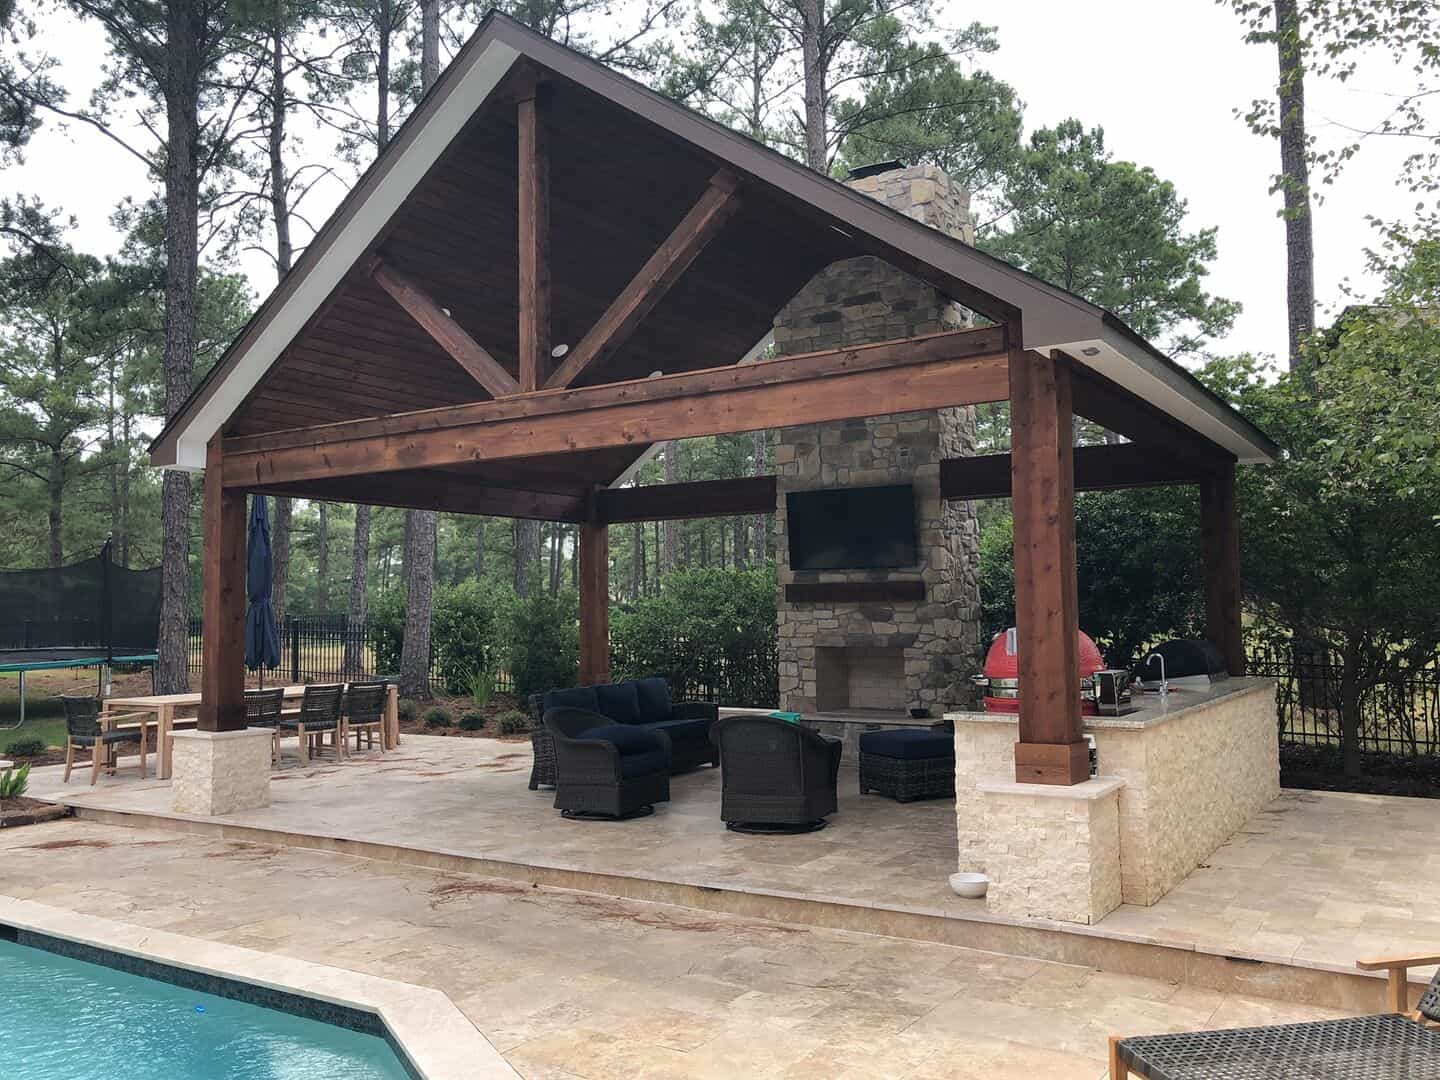 Building a Covered Patio in Houston? Consider This